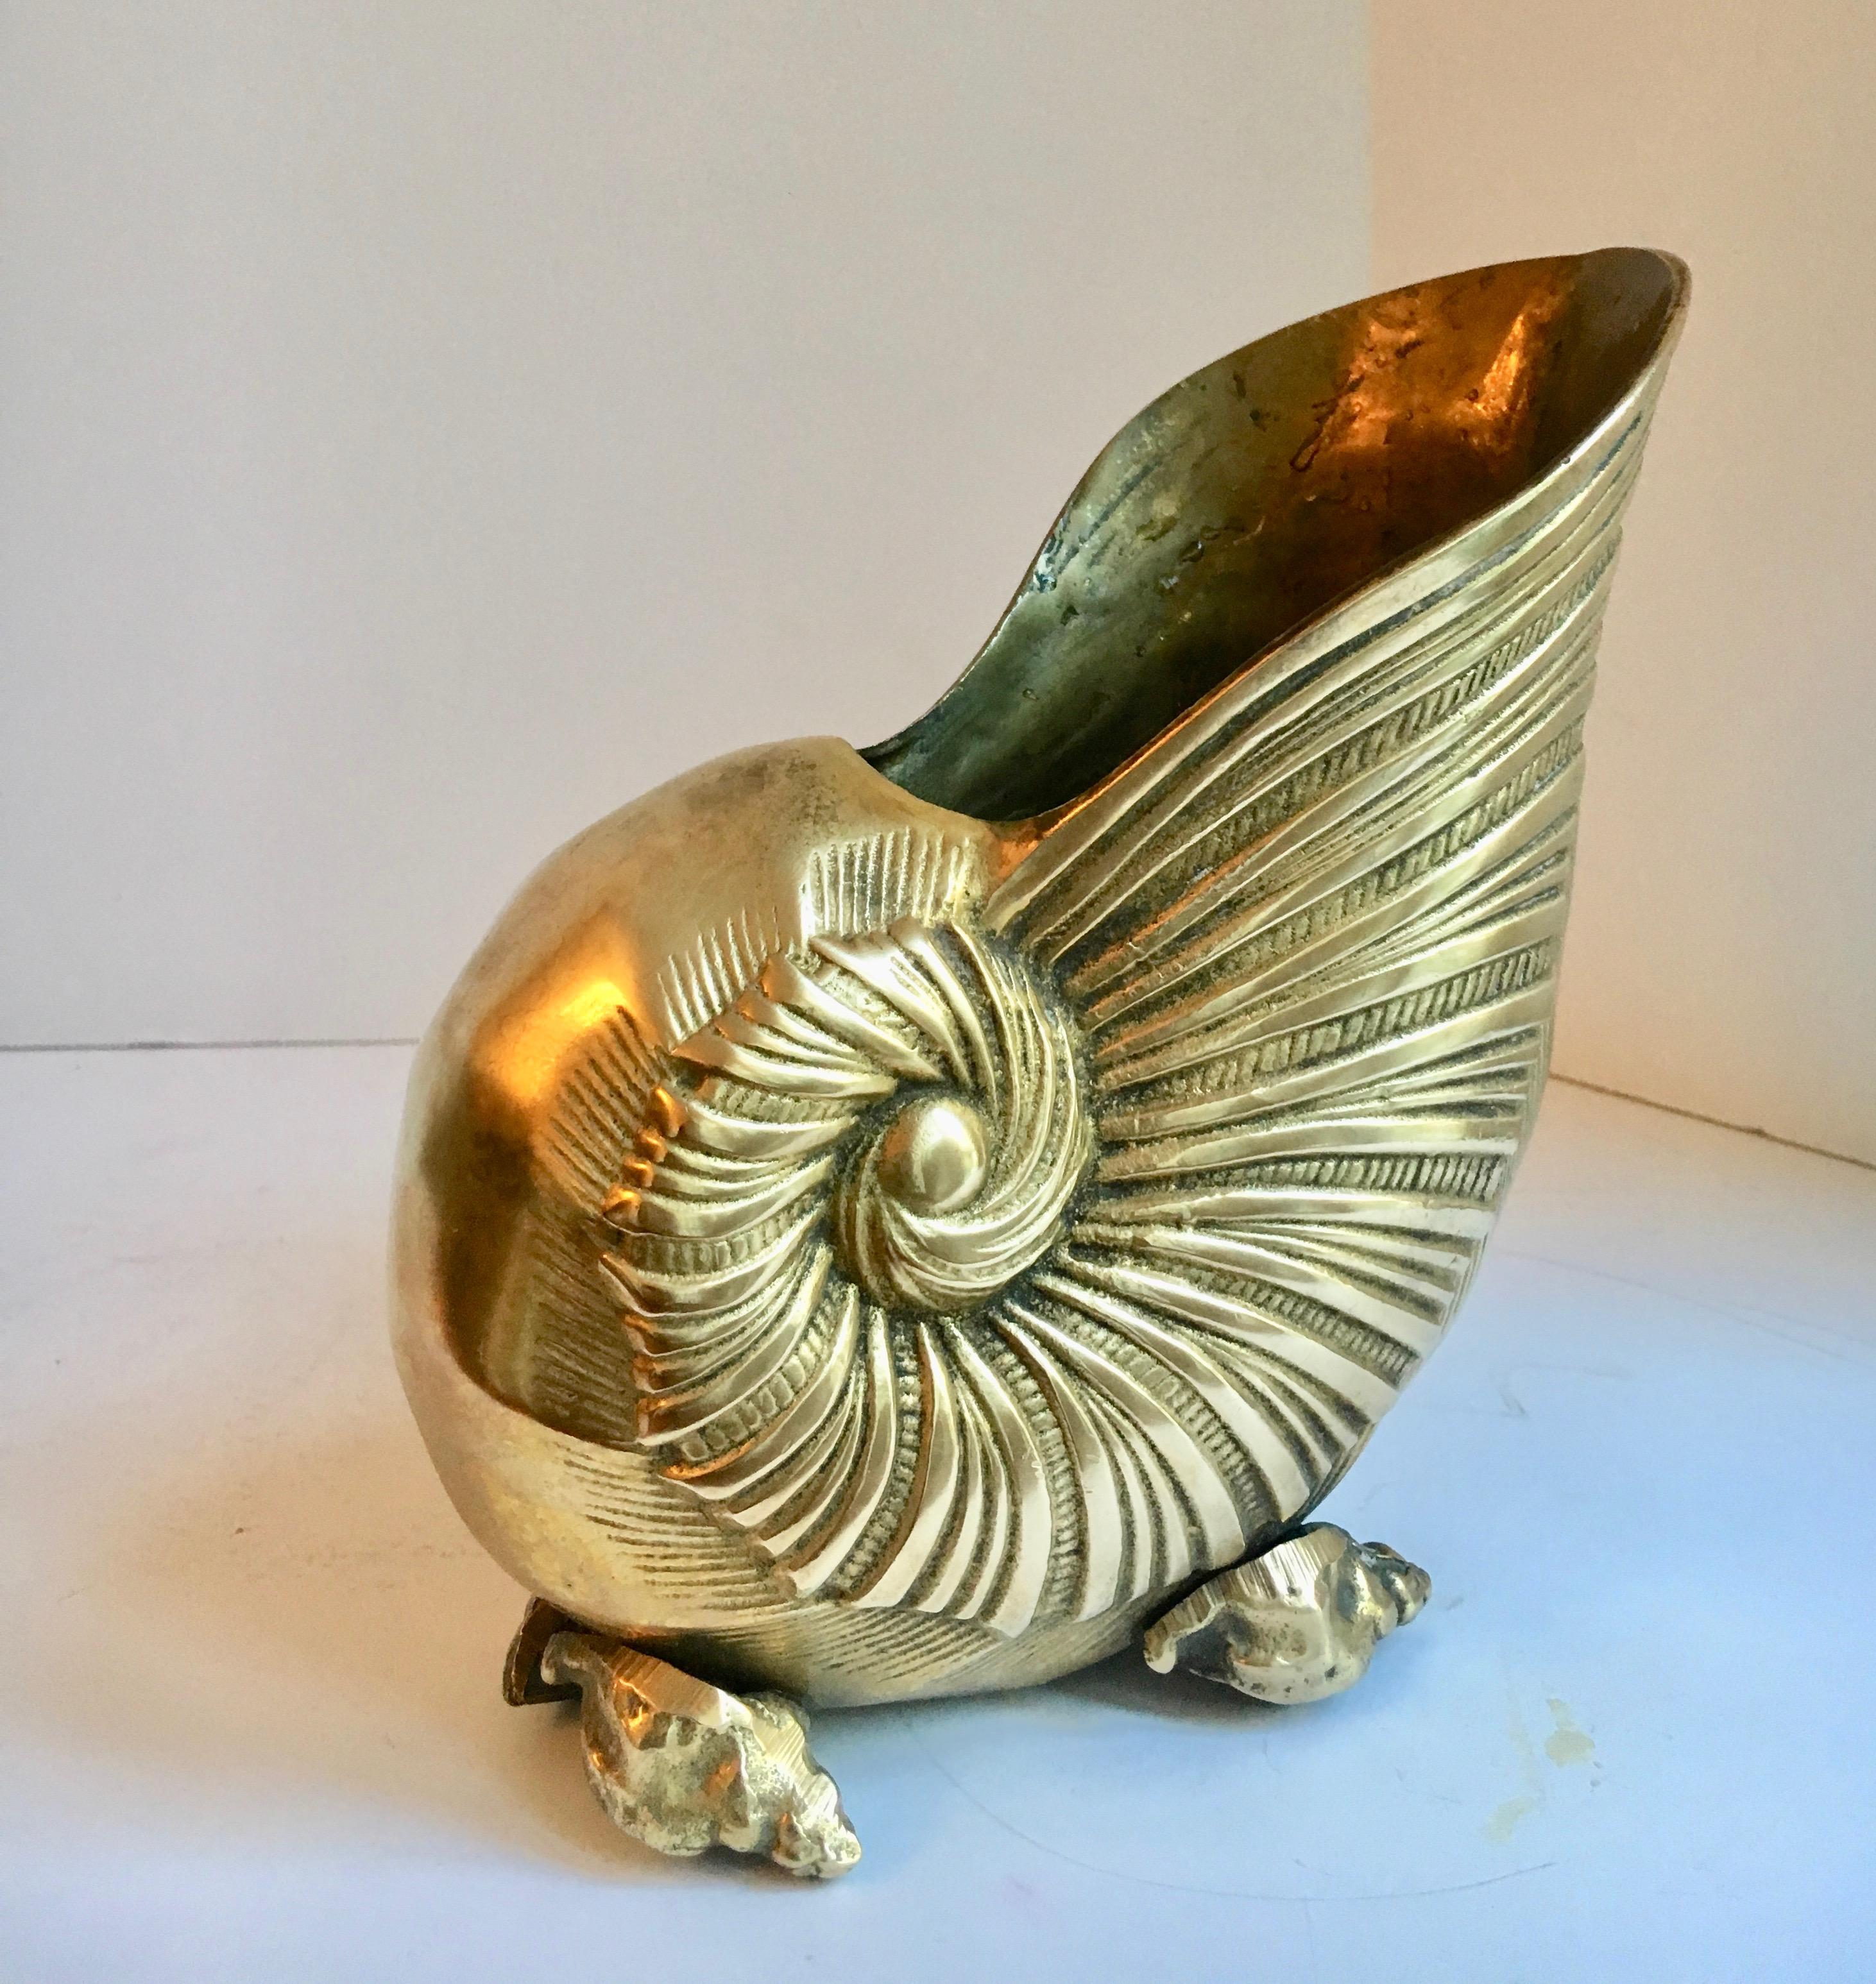 Brass shell cachepot planter - a very handsome shell nautical planter perfect for the desk and befitting of an orchid or small planting.

Beautiful brass with a very solid and dynamic presence.